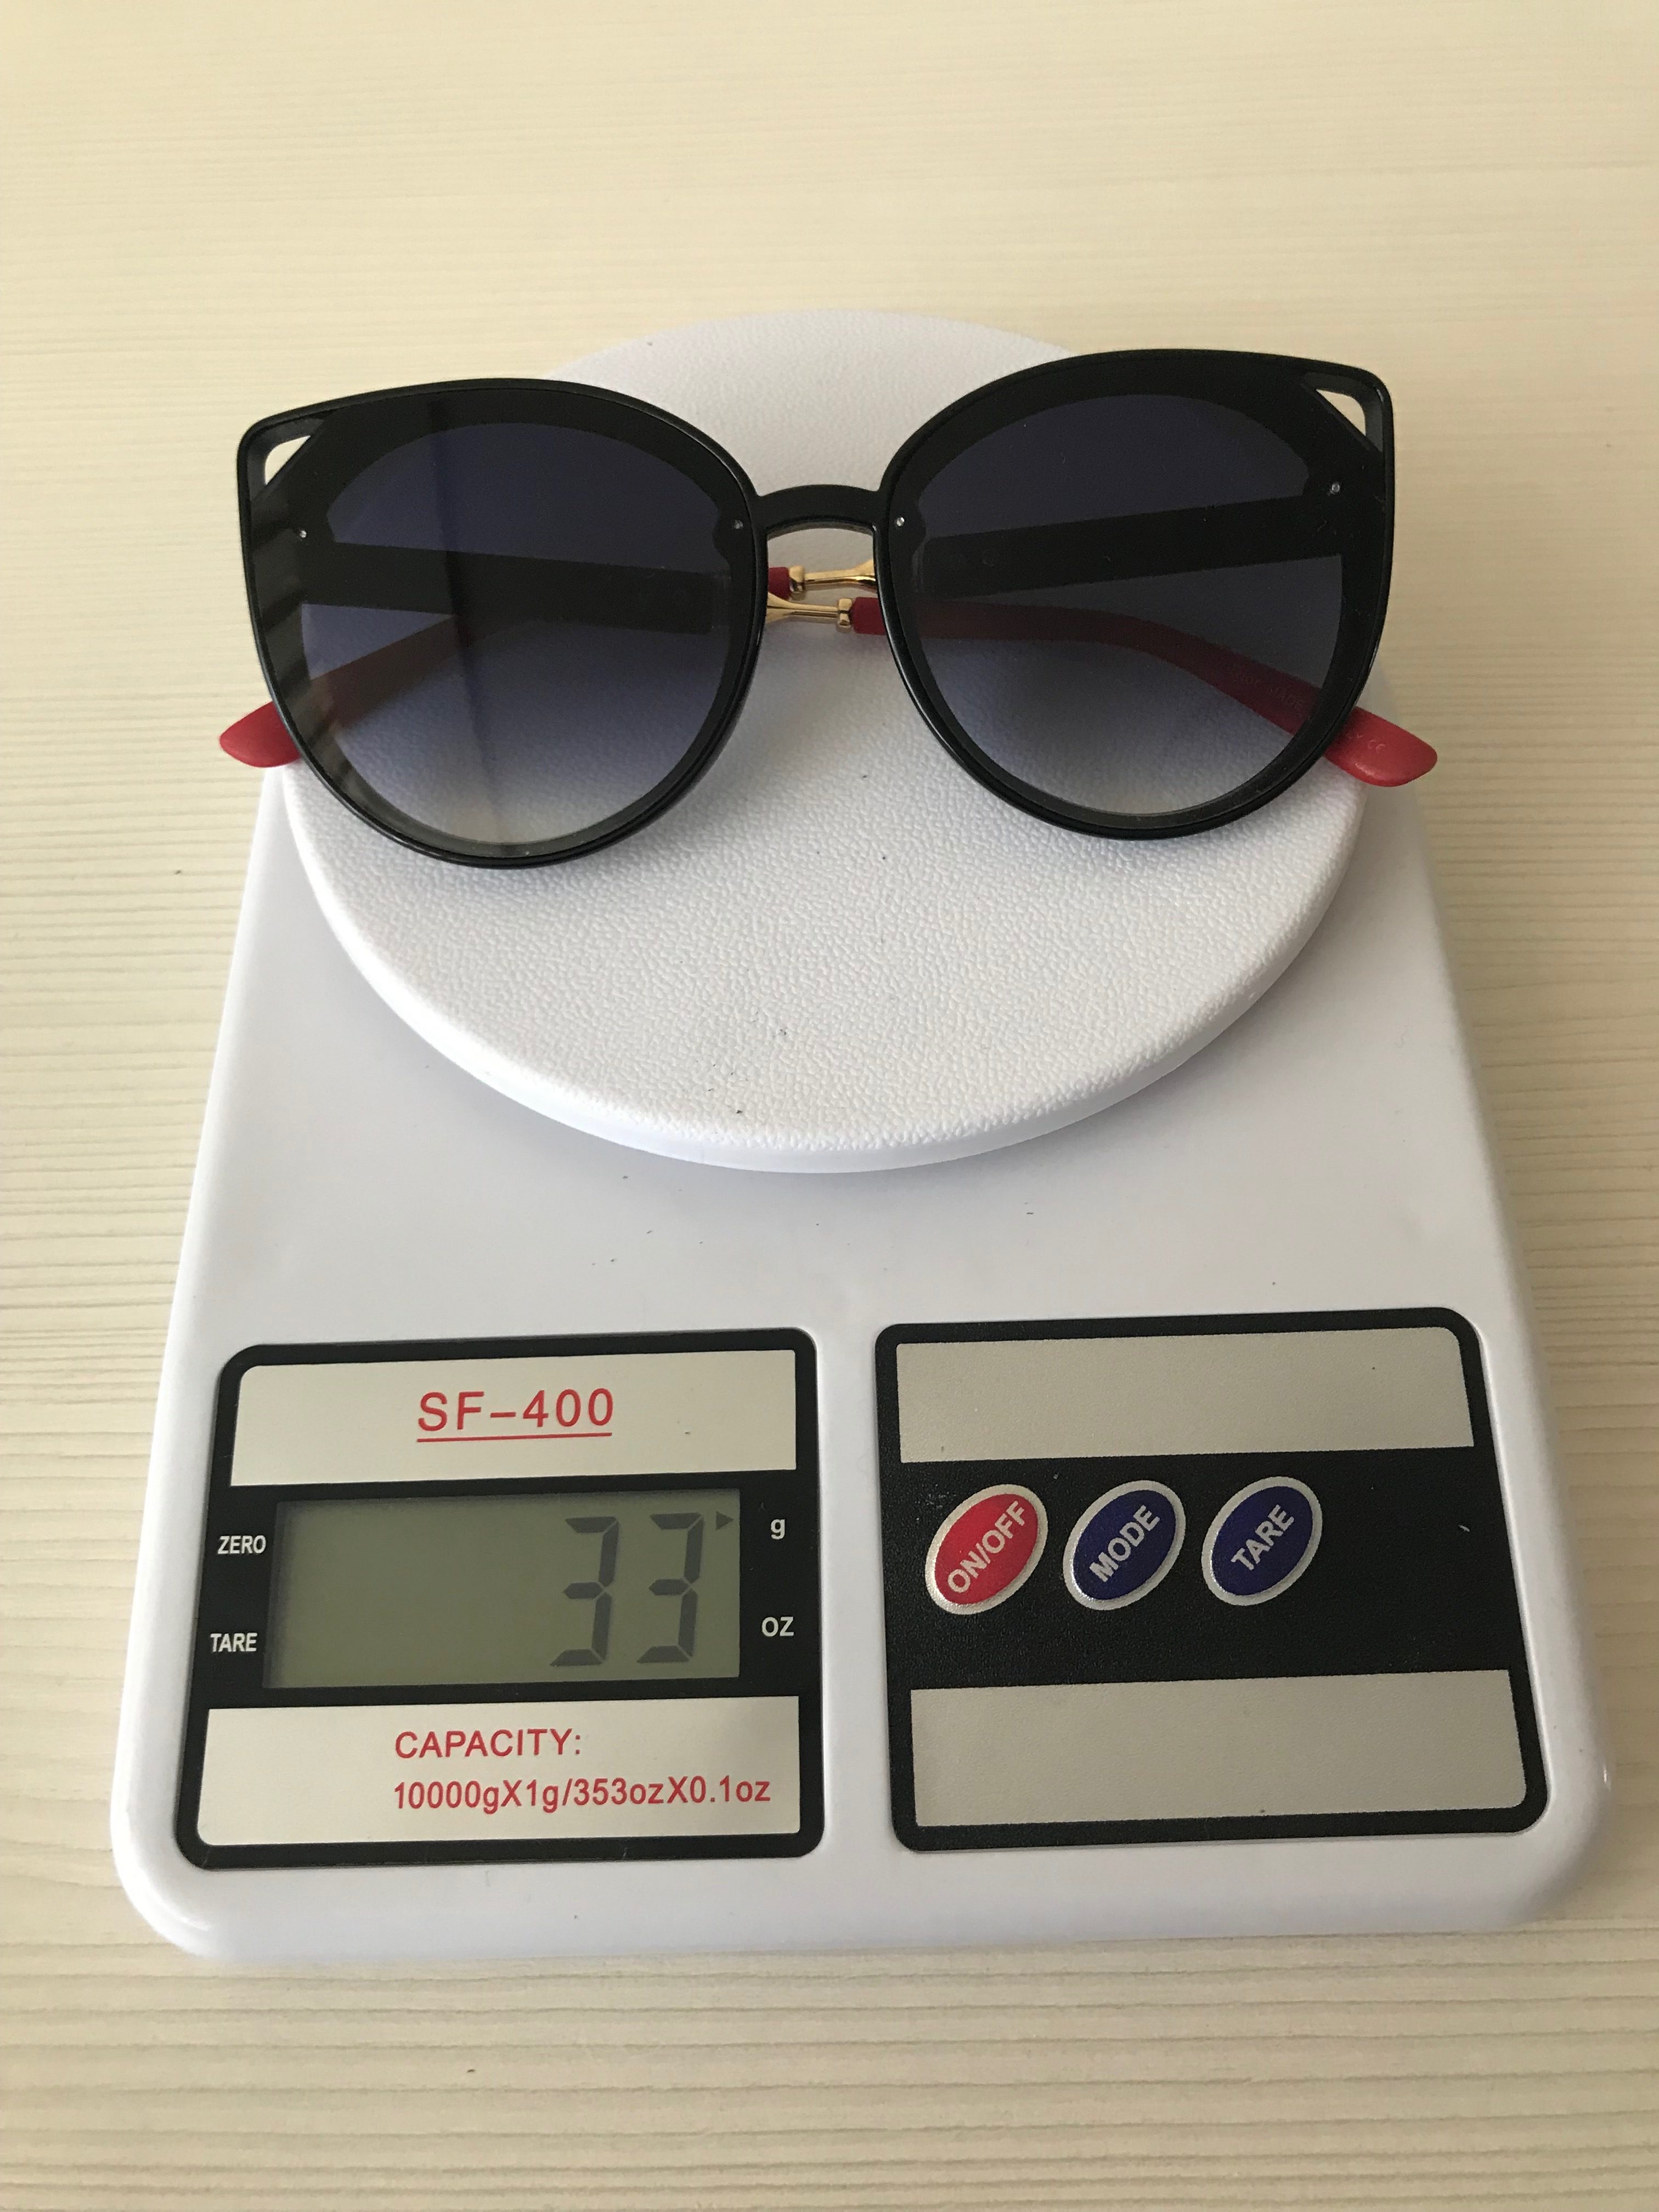 How much do sunglasses weigh?